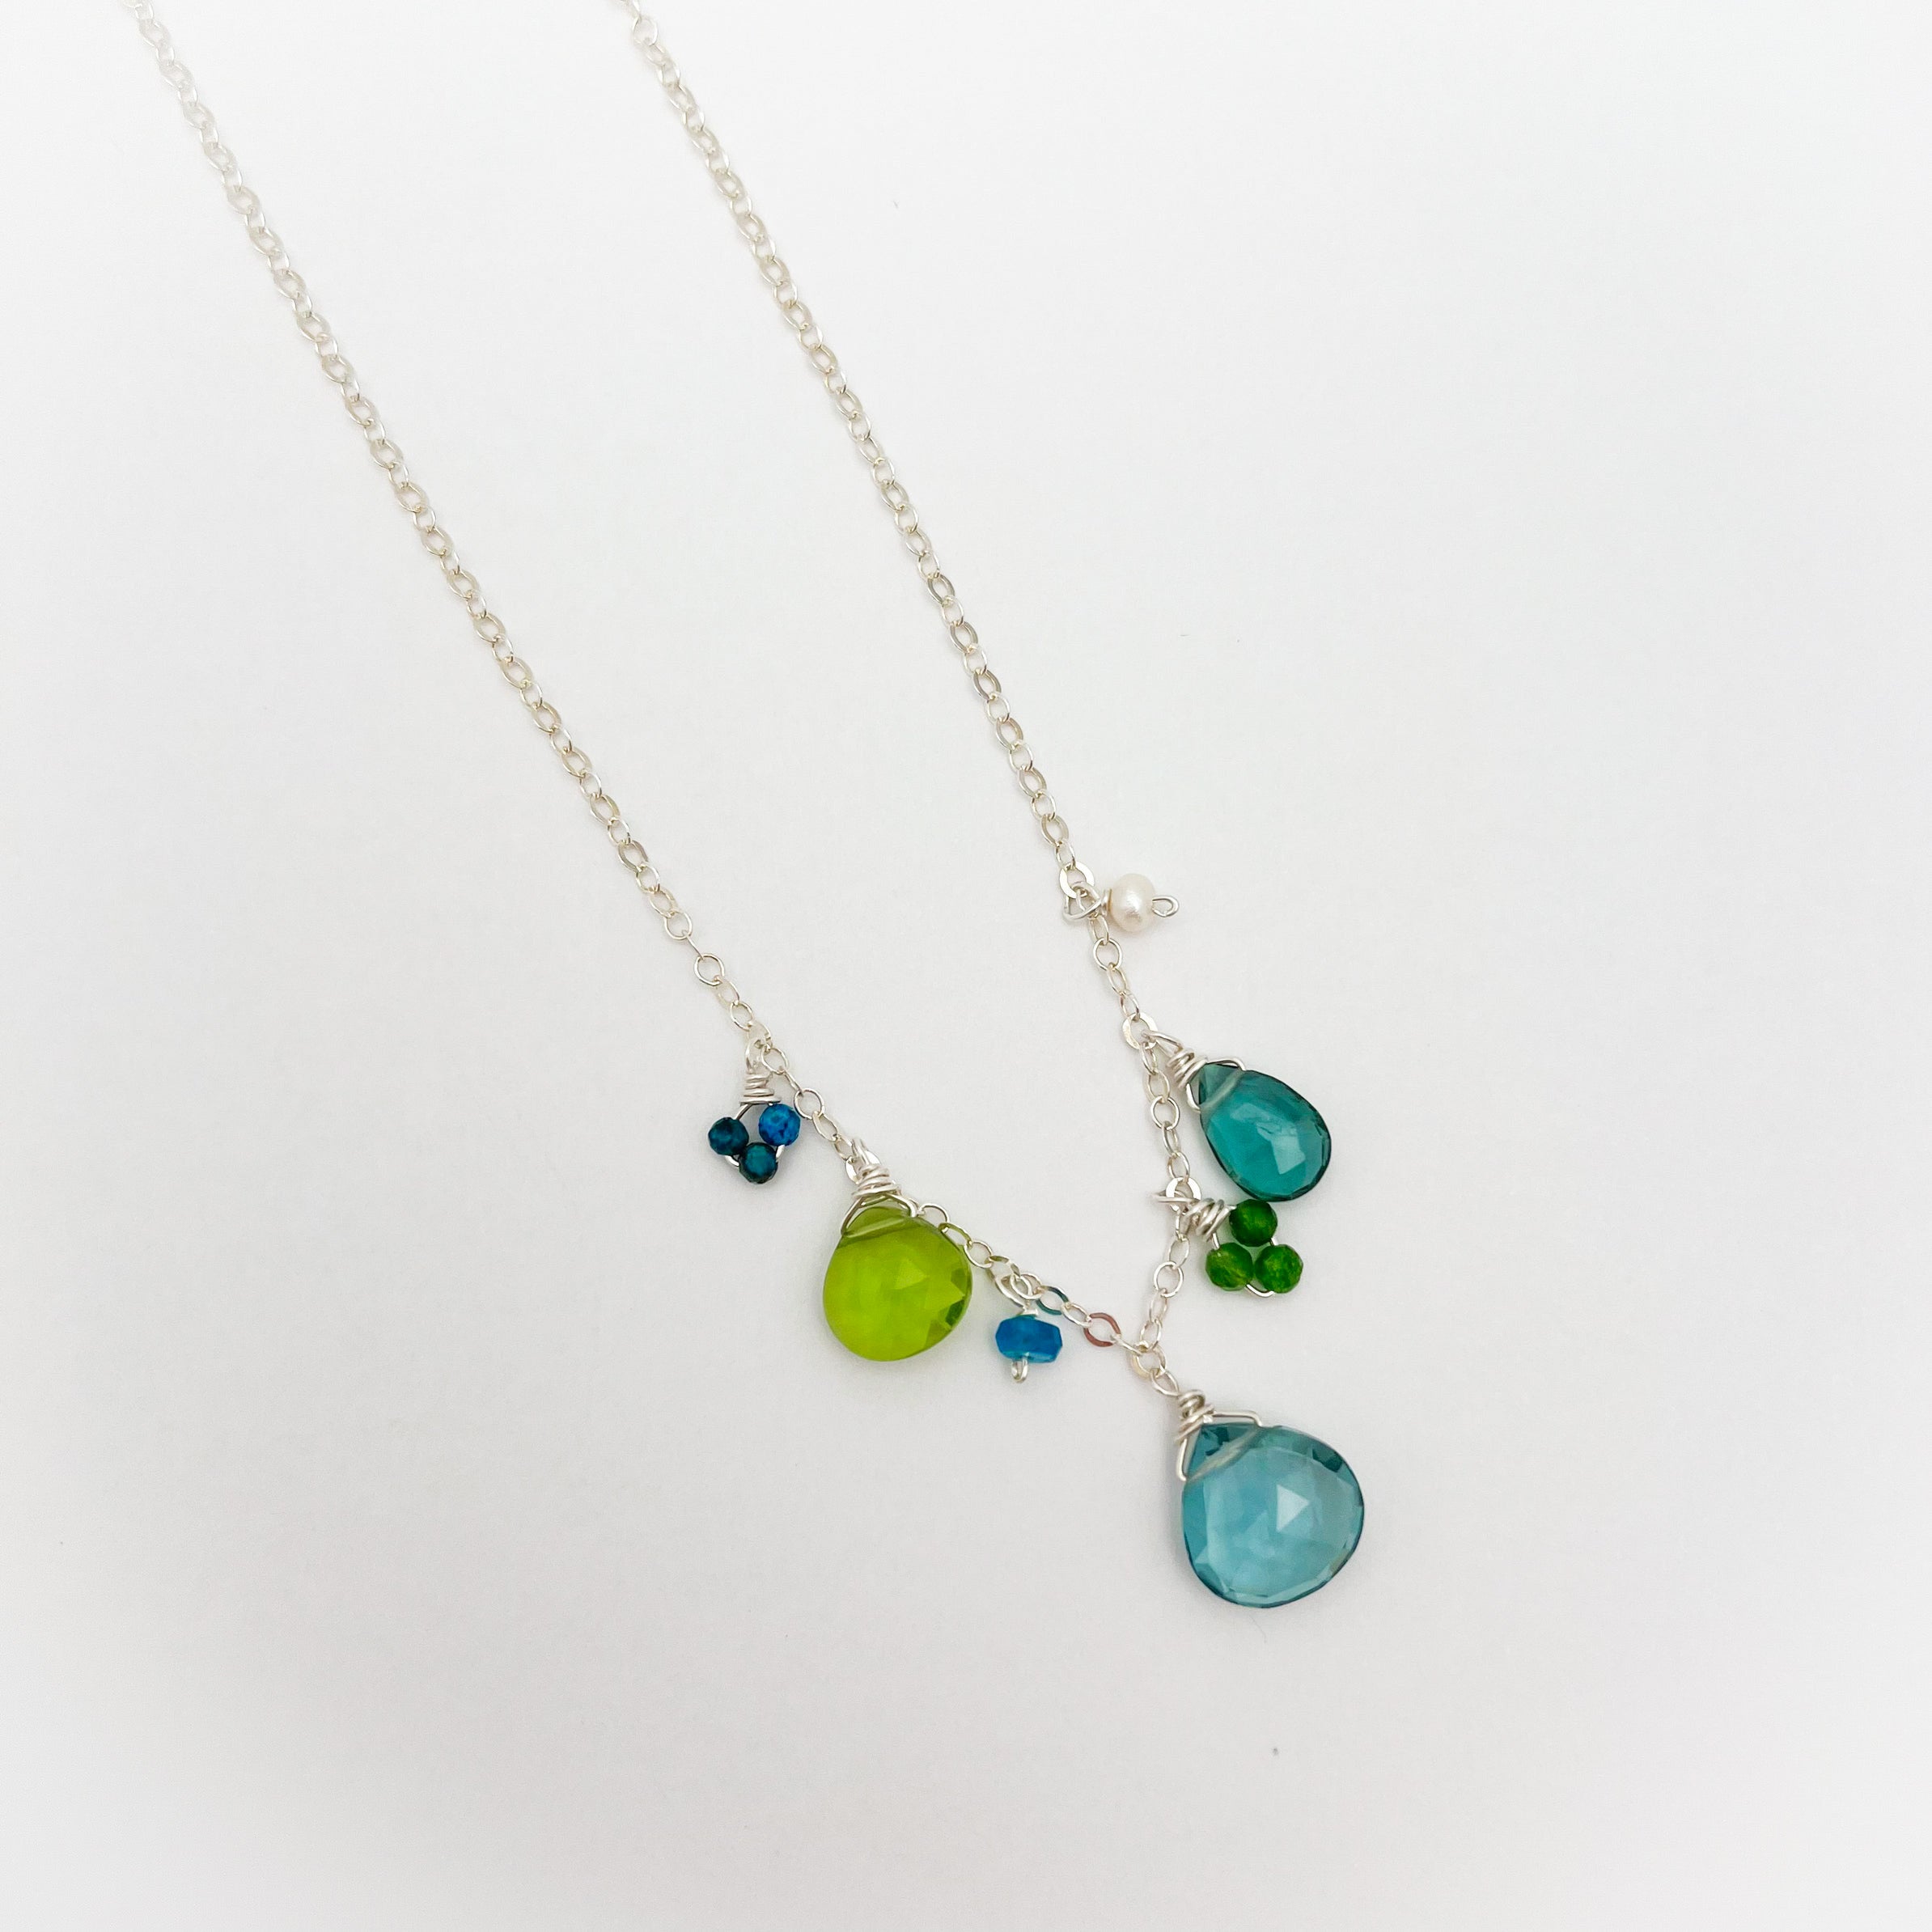 STERLING SILVER NECKLACE WITH BLUE TOPAZ, PERIDOT, & INDICOLITE